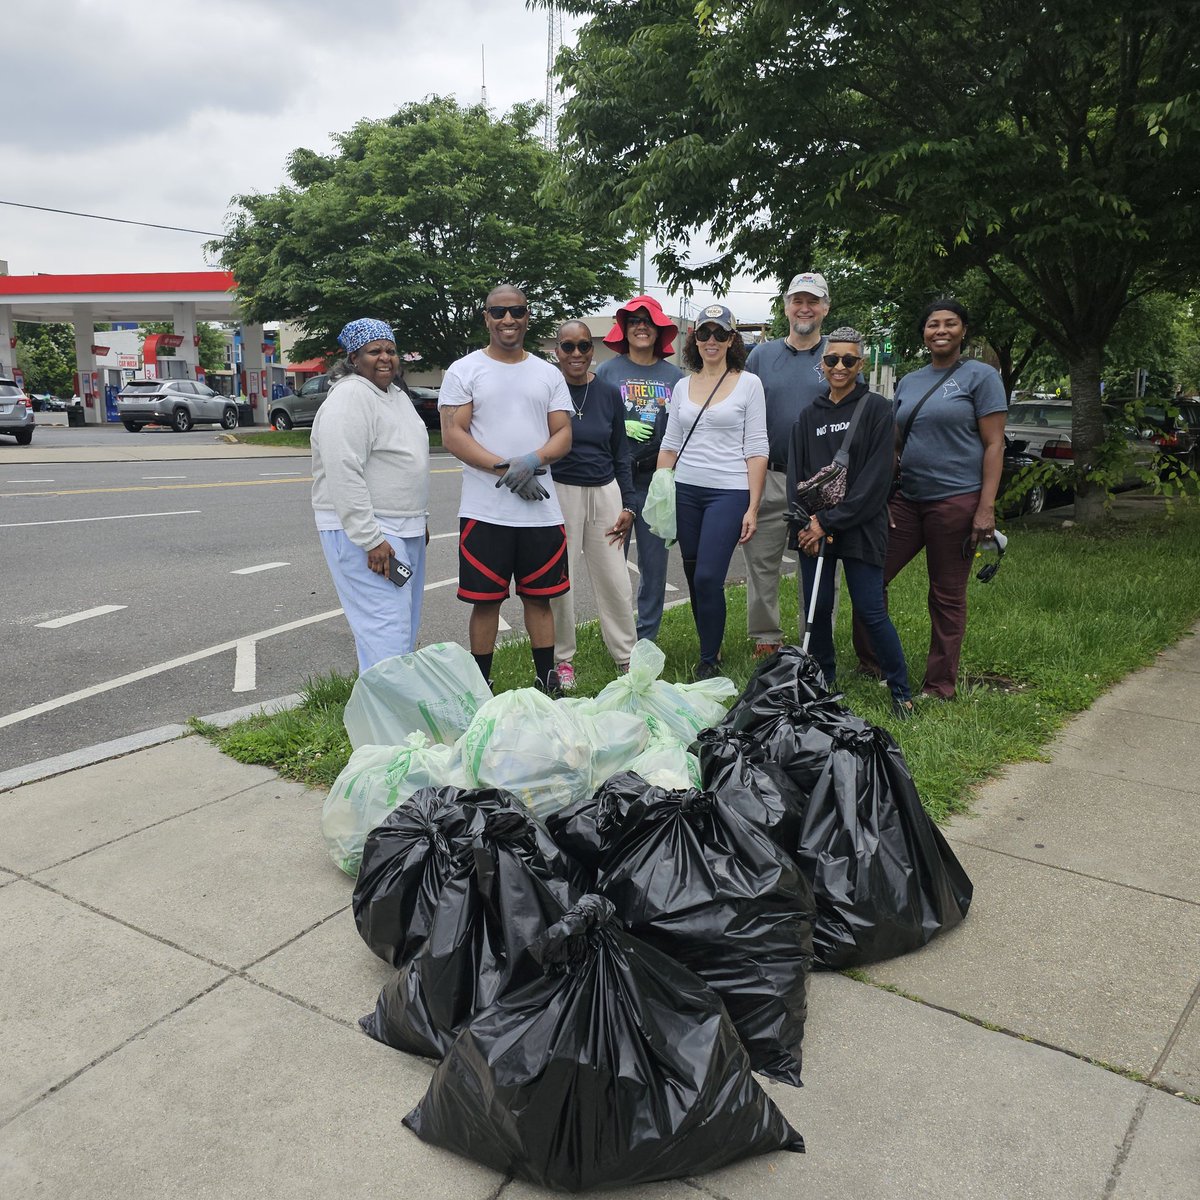 Thanks to the Mayor's Office of the Clean City for providing supplies. The Brightwood Community Association Spring Clean Up left Brightwood brighter. Thanks to all who came out.